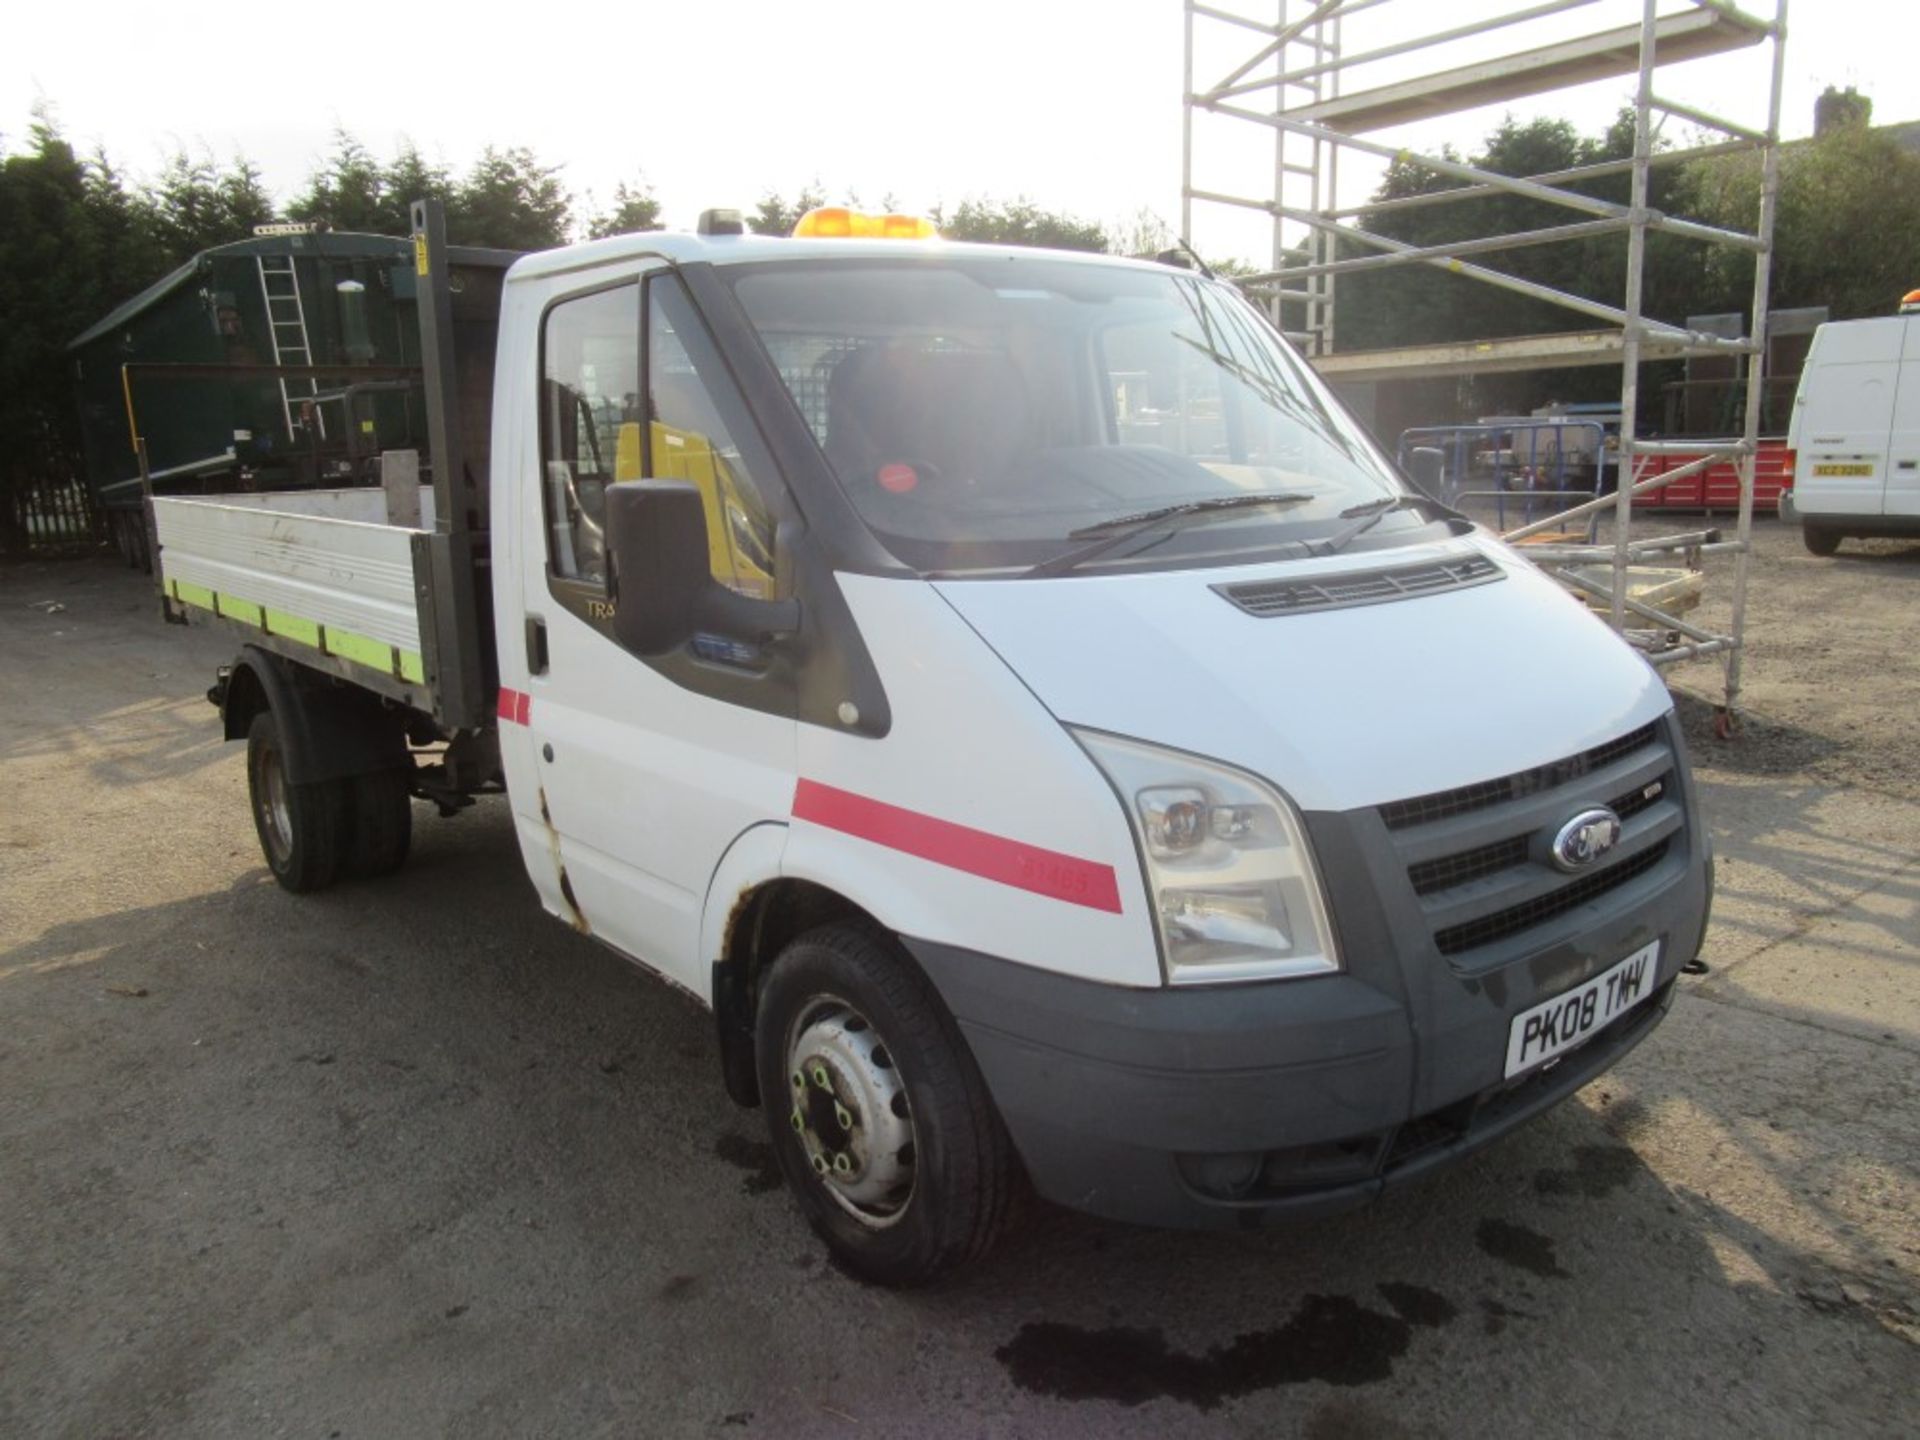 08 reg FORD TRANSIT 100 T350M TIPPER (DIRECT COUNCIL) 1ST REG 03/08, 52213M, V5 HERE, 1 OWNER FROM